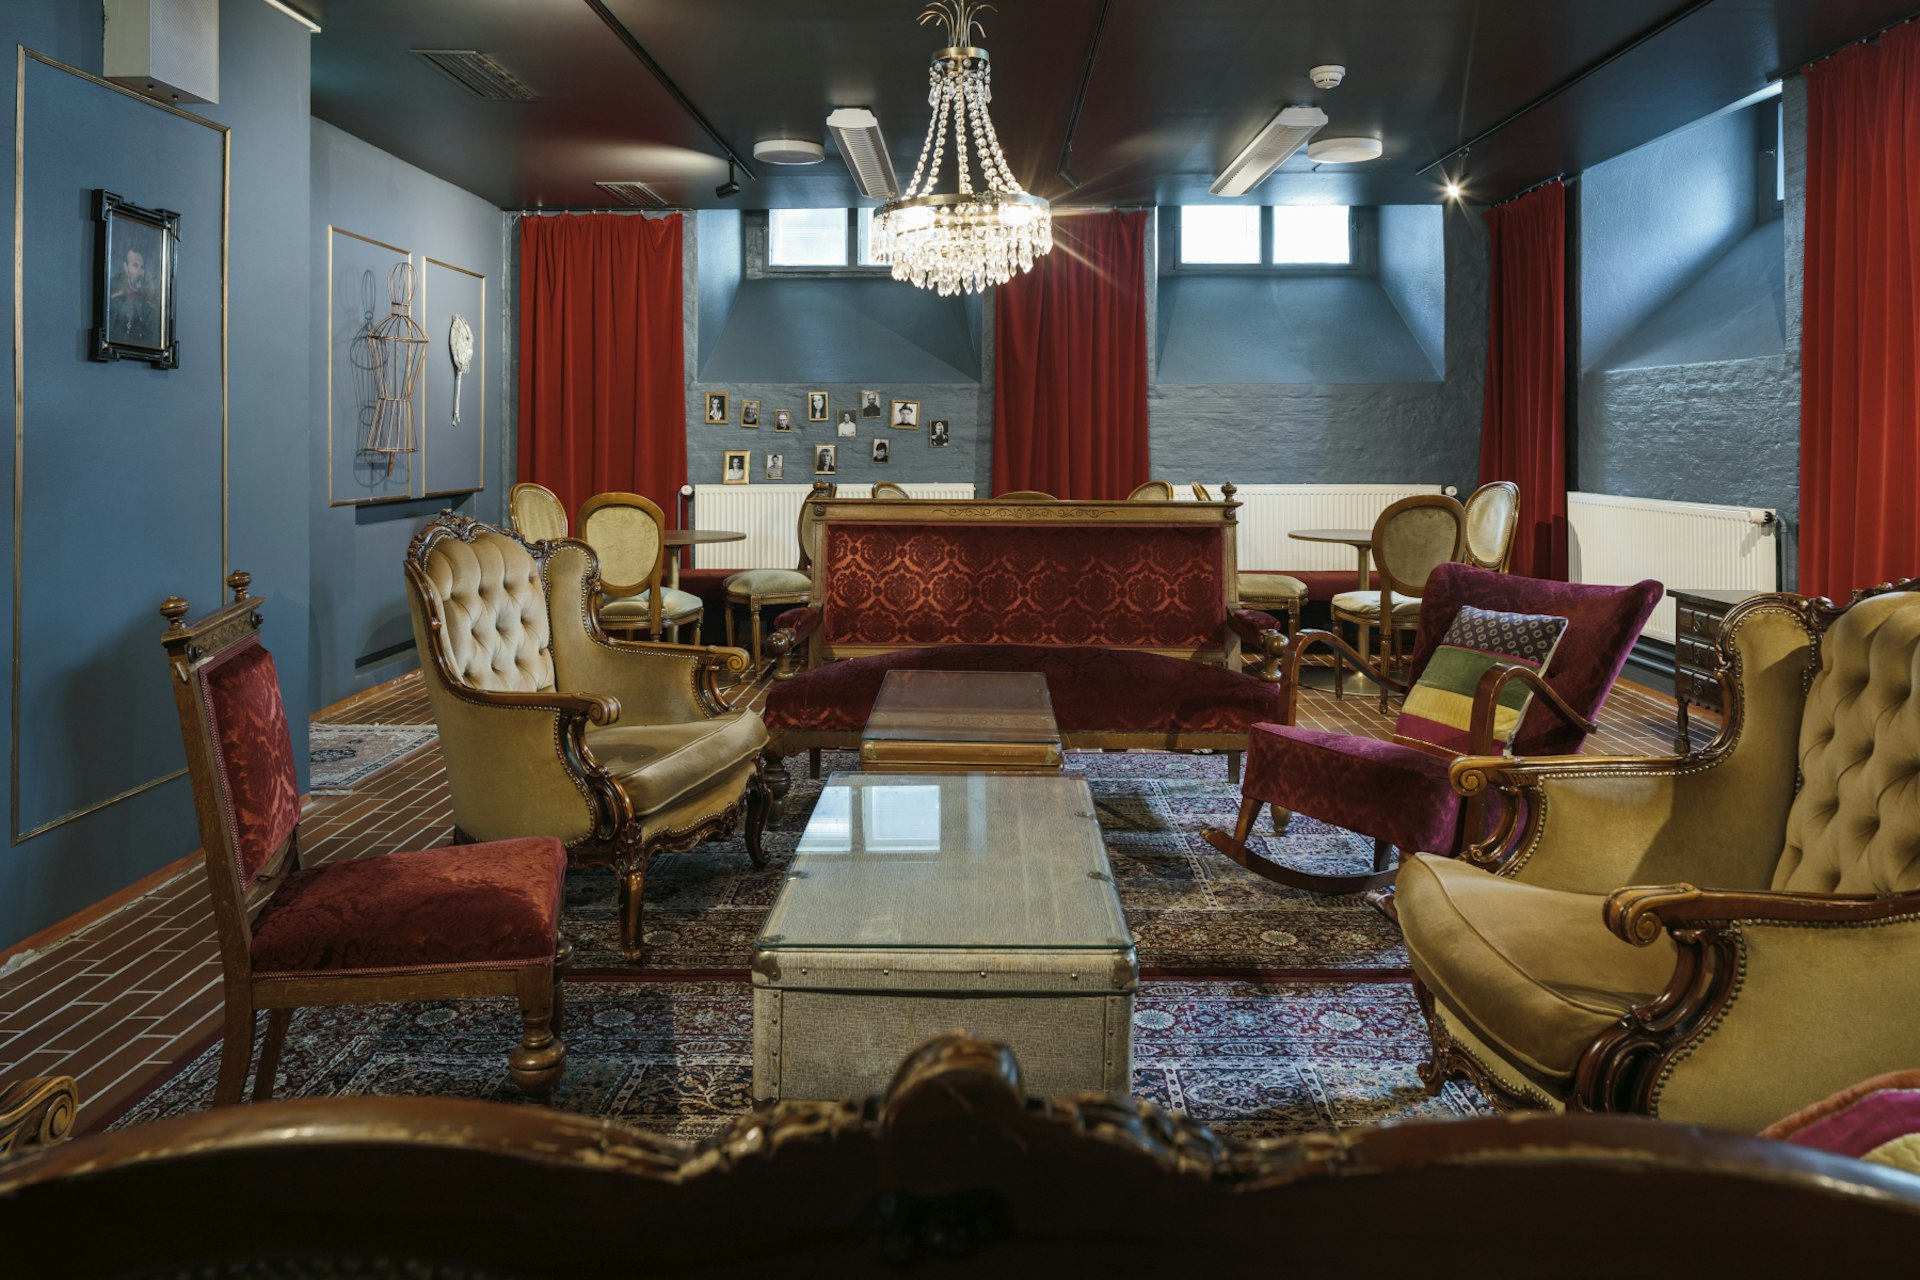 A picture of one of the theatre's sitting rooms with sofas, armchairs and richly decorated carpets and curtains